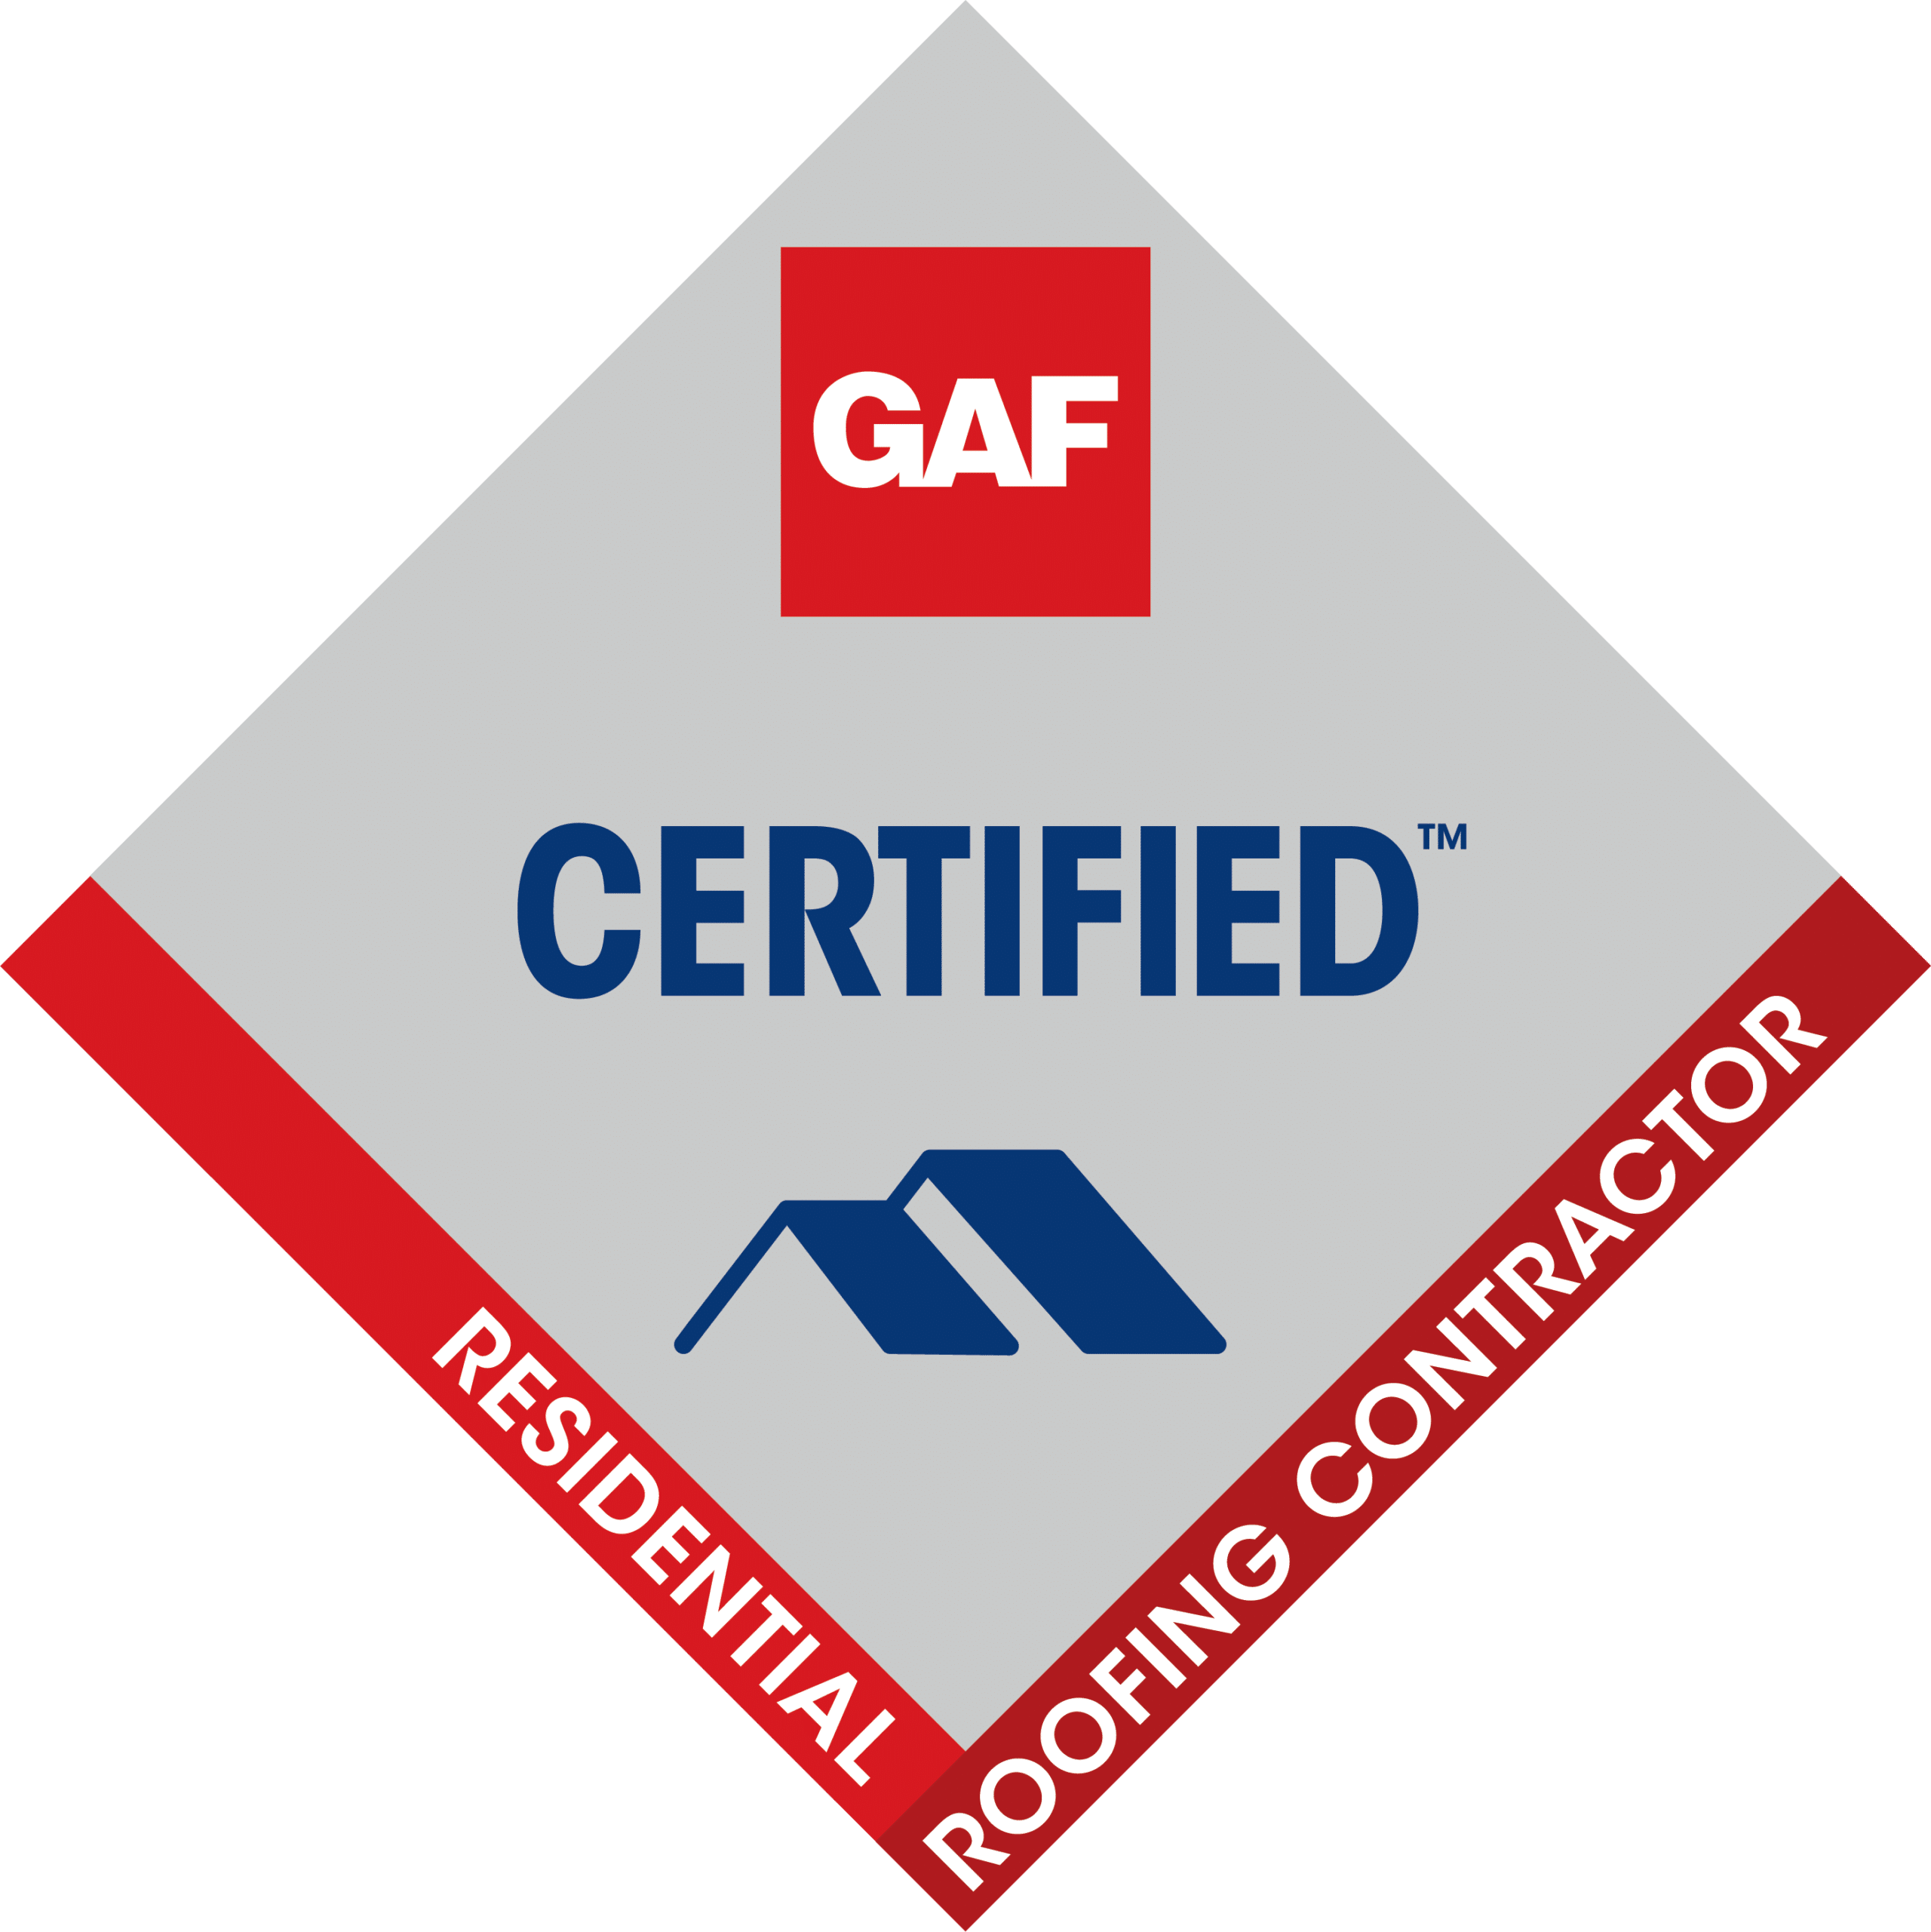 GAF Certified Residential Roofing contractor